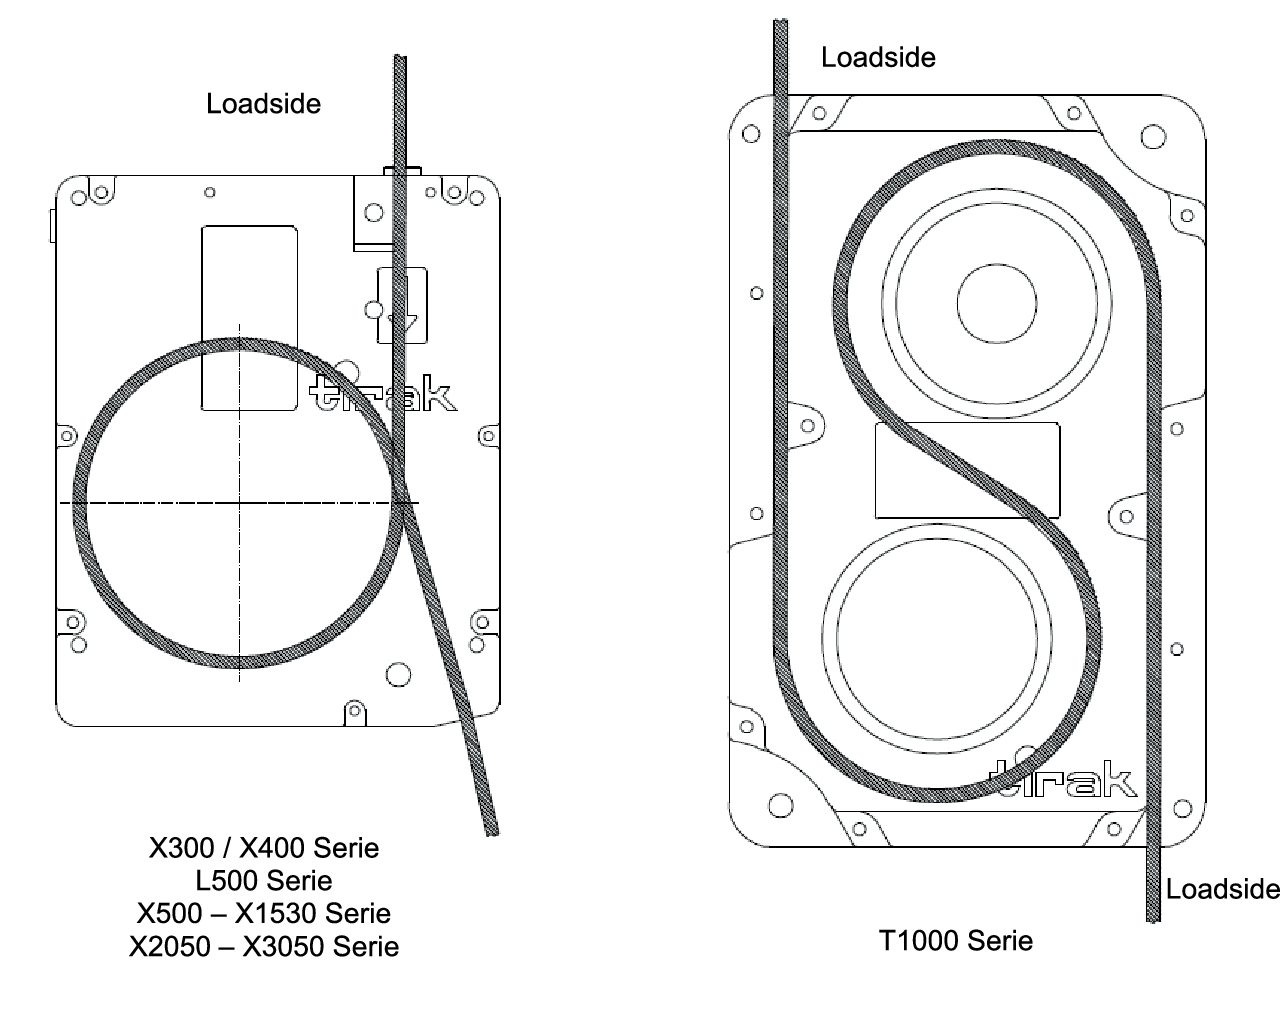 Loadside spesifications for X300, X400, L500, X500 to X1530 and X2050 to X3050 series